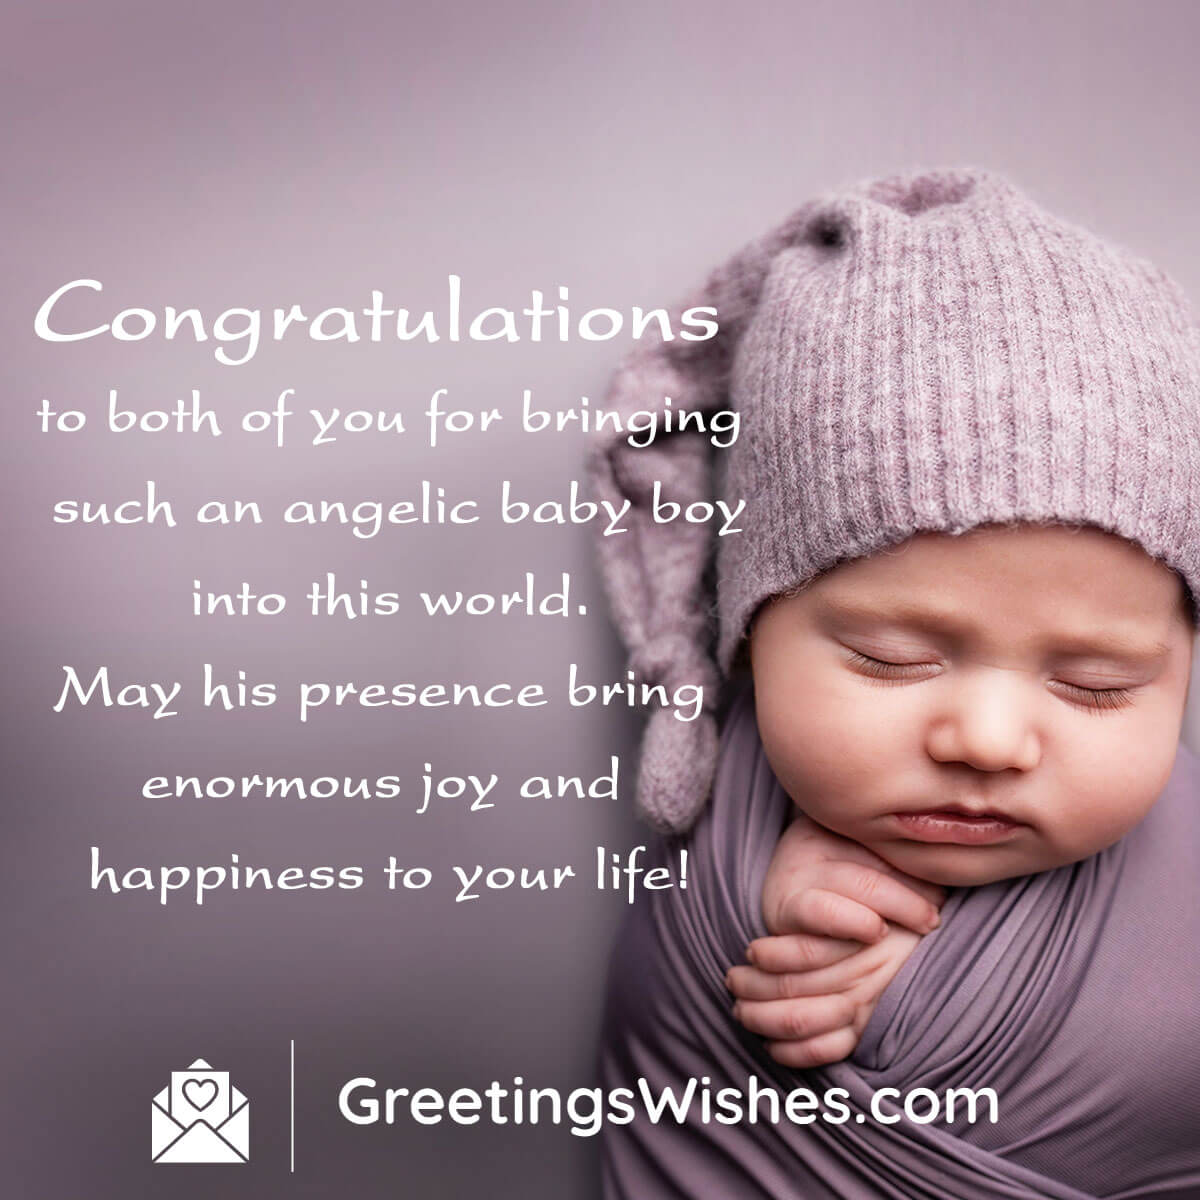 Congratulations Baby Boy - Greetings Wishes